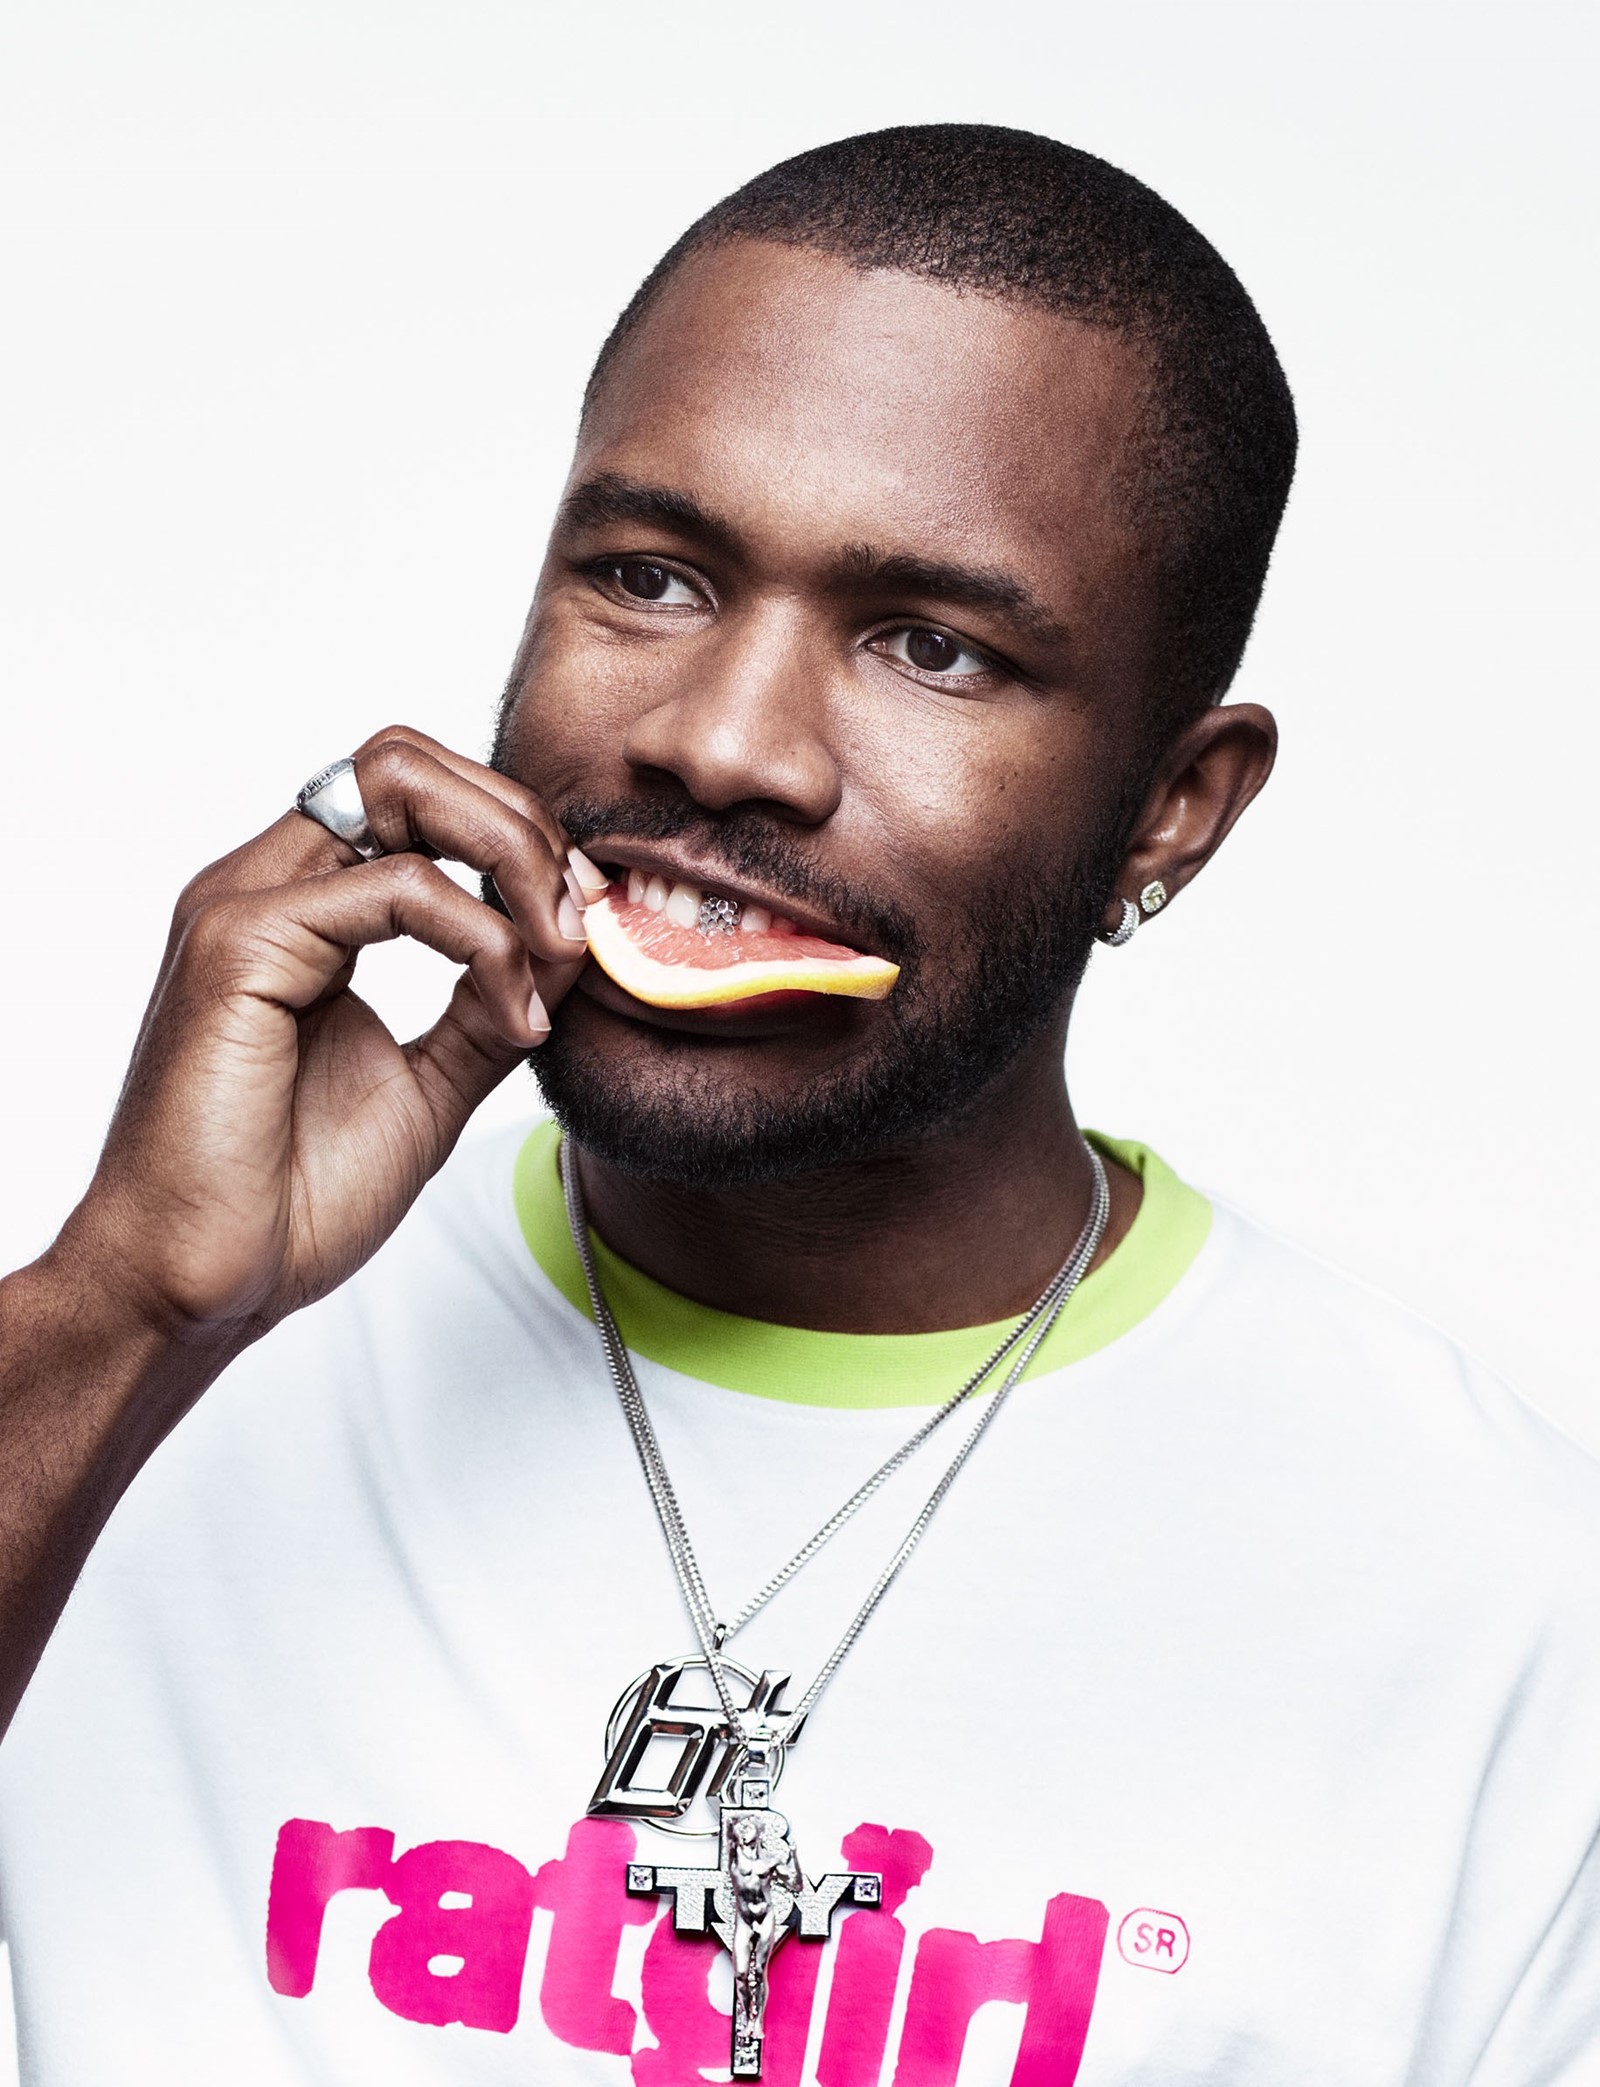 The world according to Frank Ocean